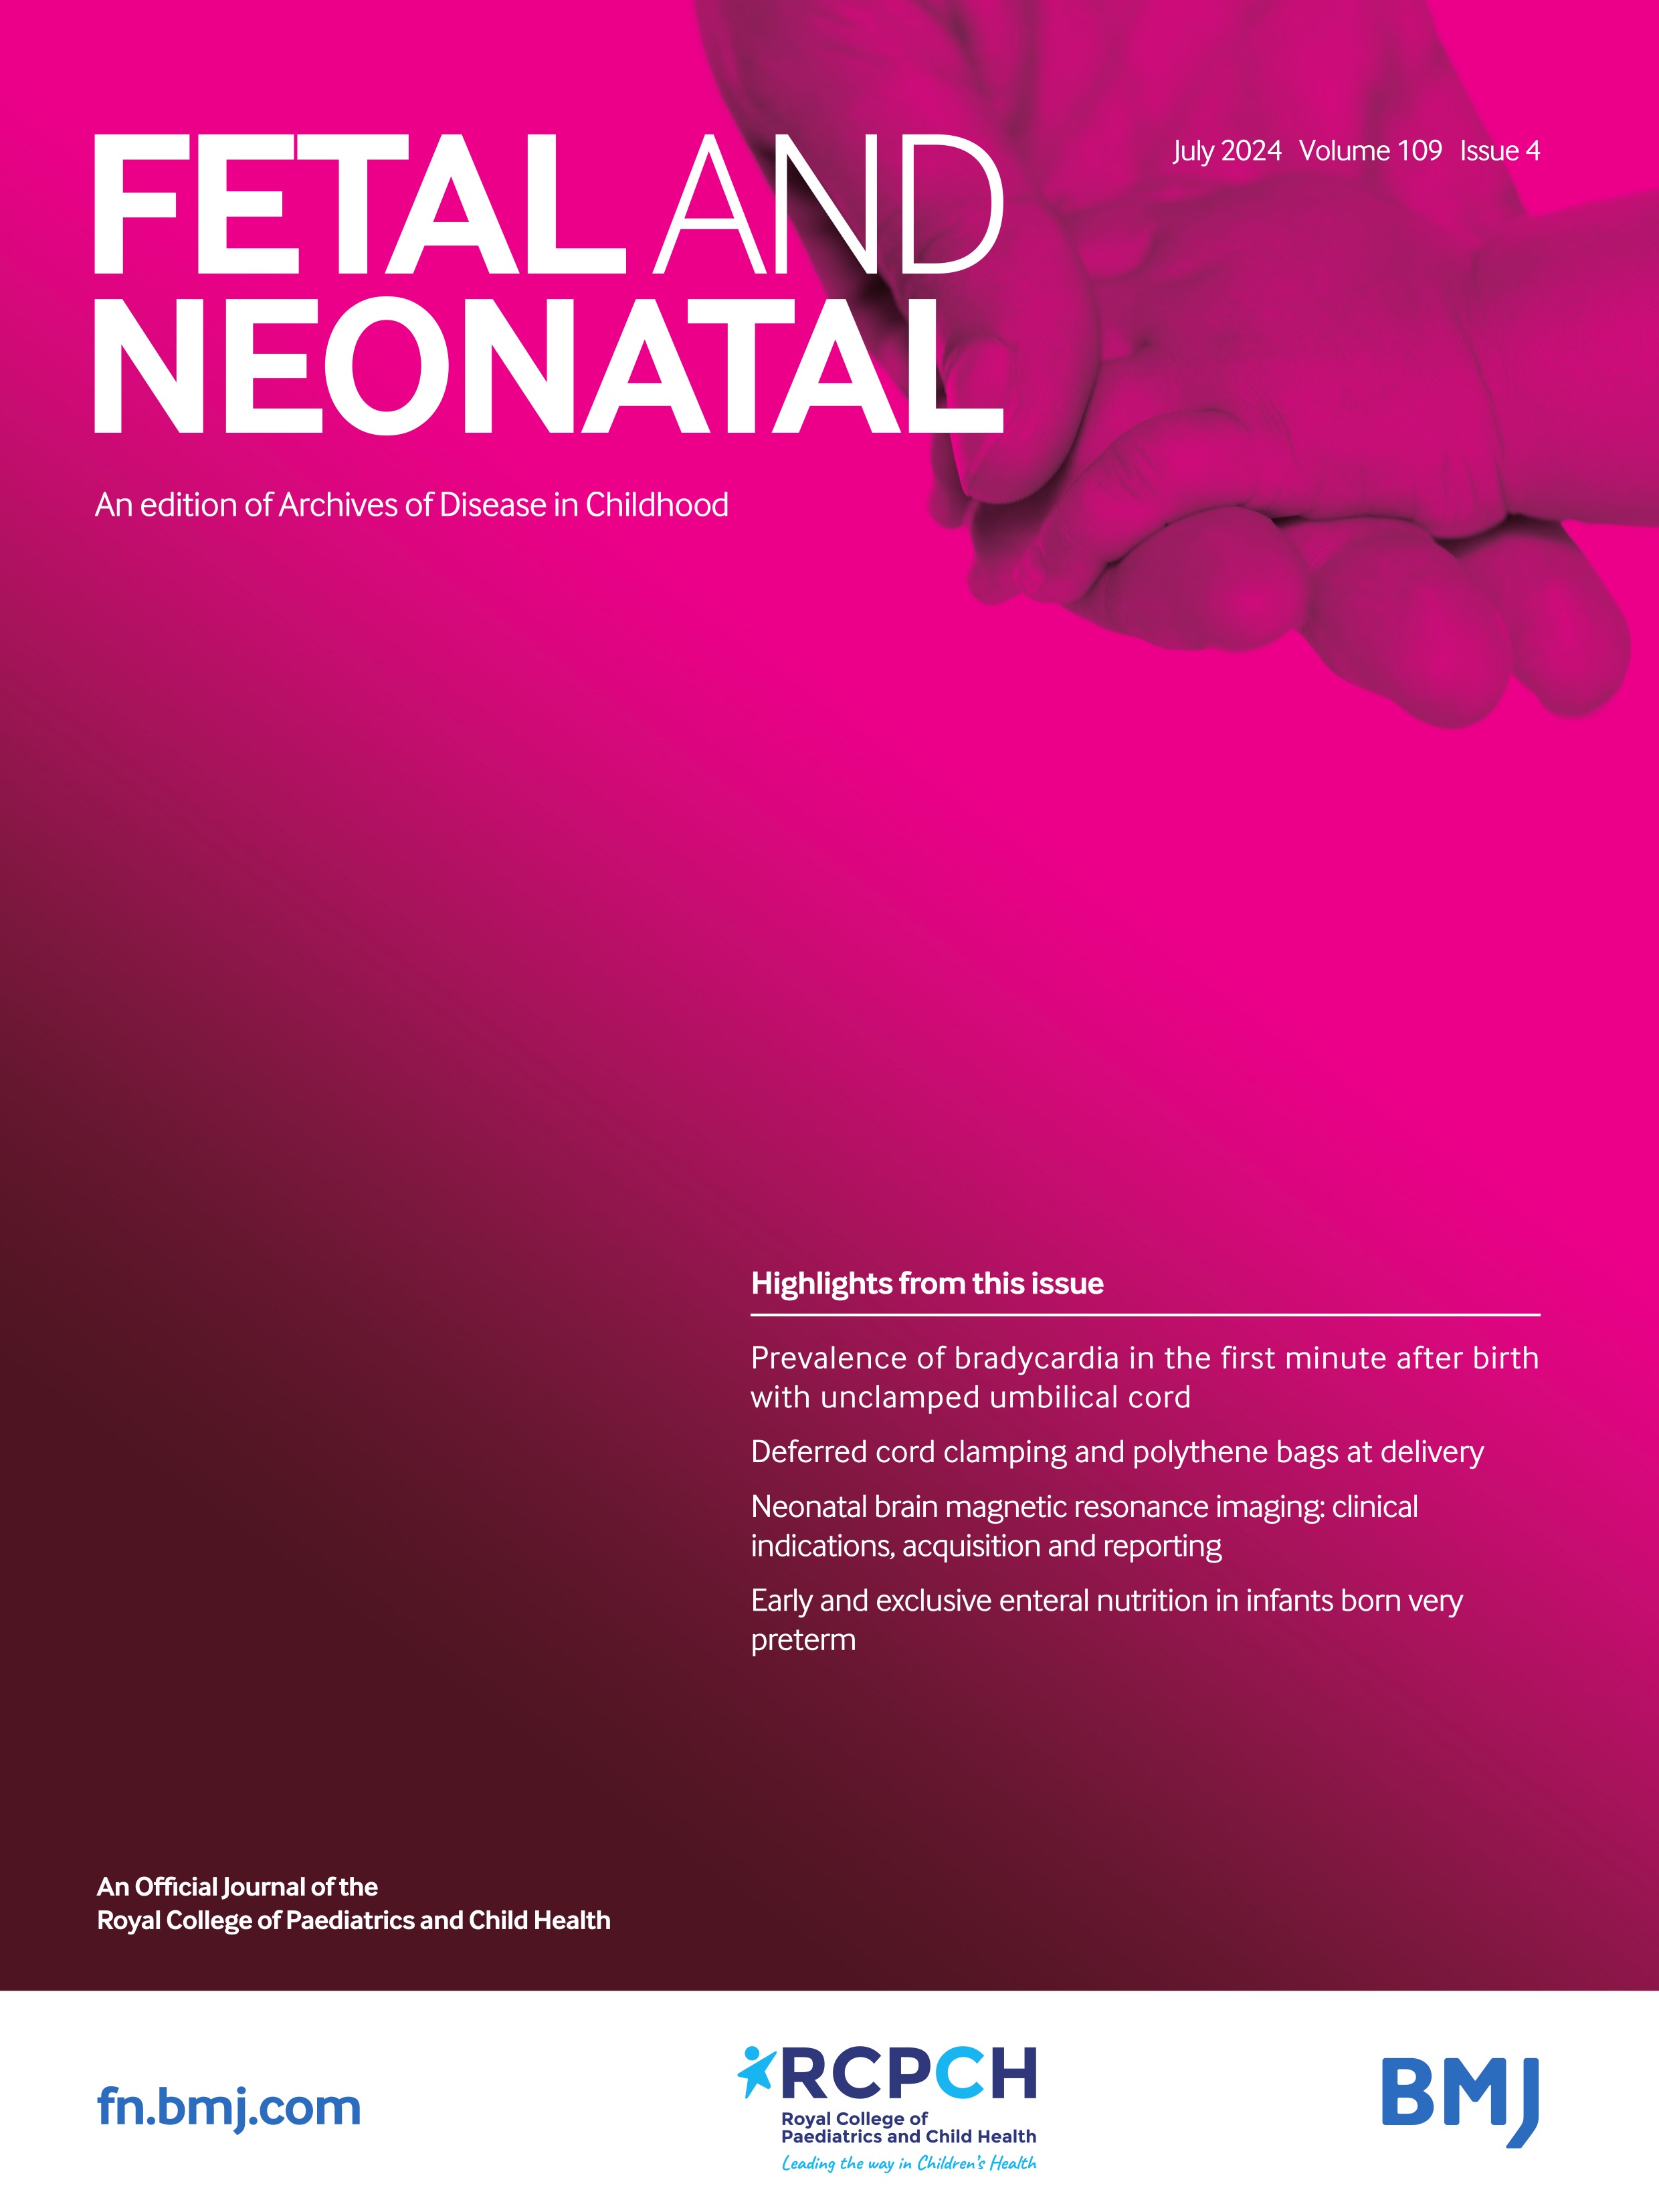 Prevalence of bradycardia in 4876 newborns in the first minute after birth and association with positive pressure ventilation: a population-based cross-sectional study